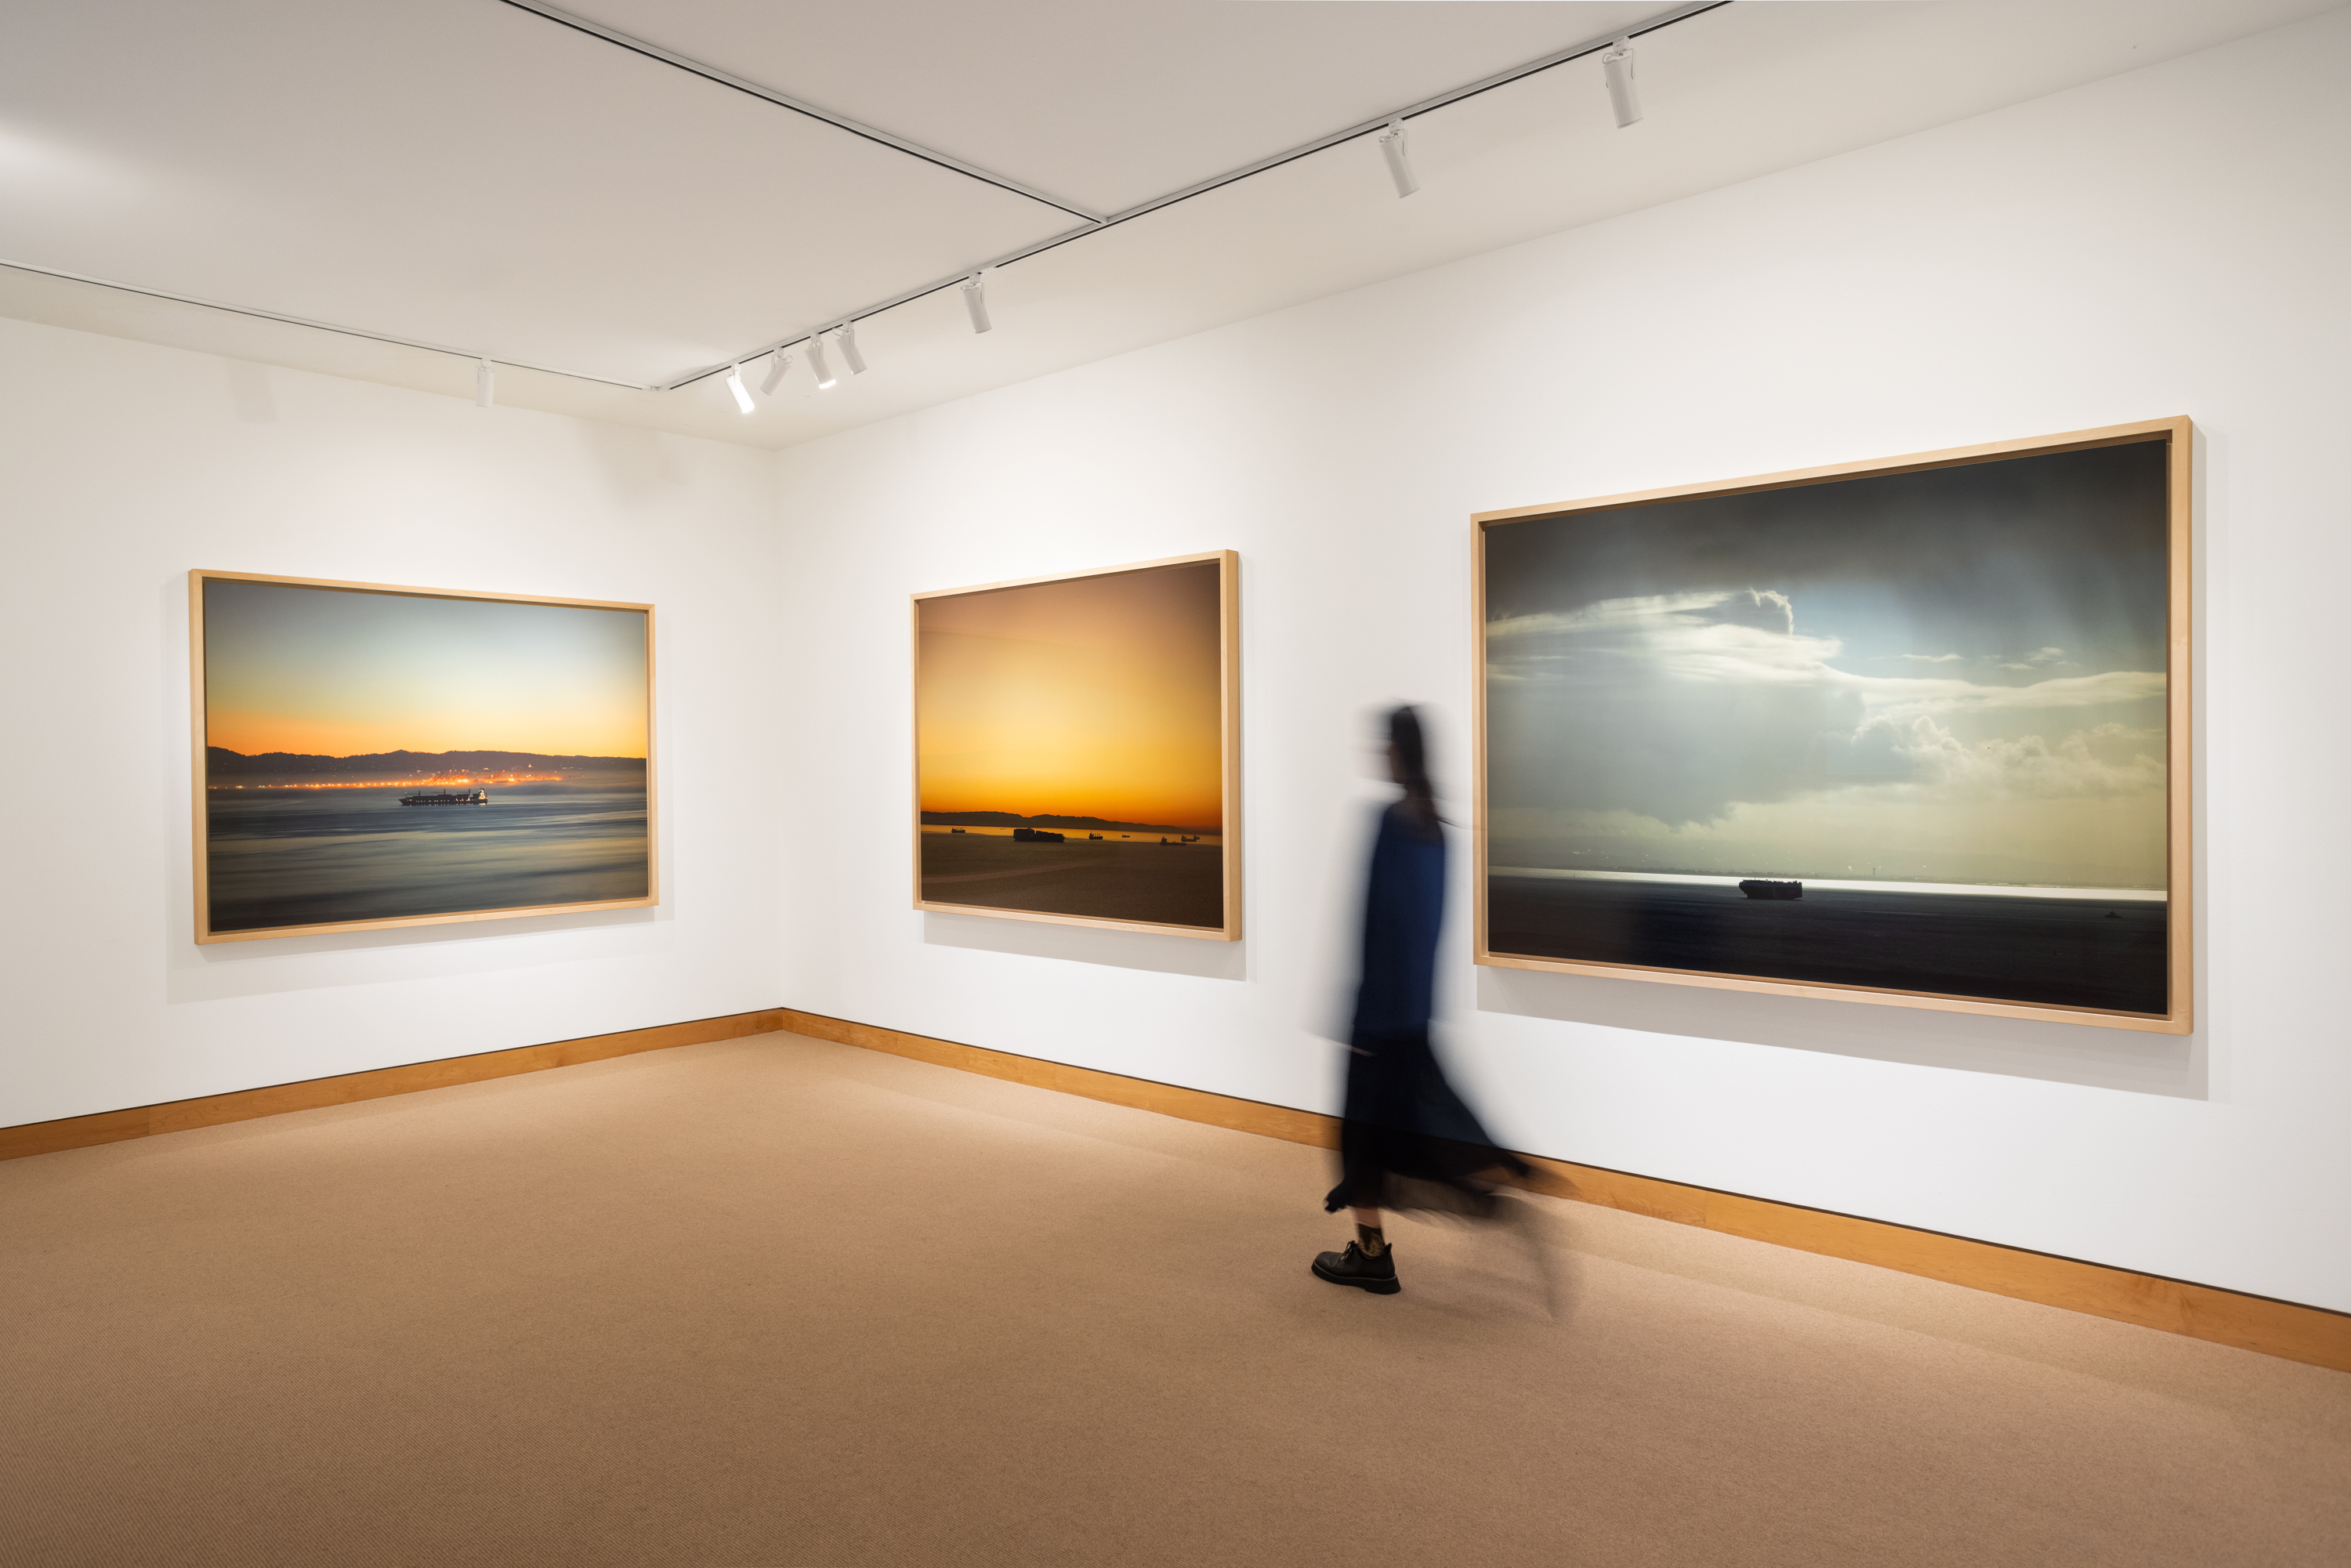 Color image of three color photographs depicting cargo ships on water at different times of day framed in bleached wood on white gallery walls